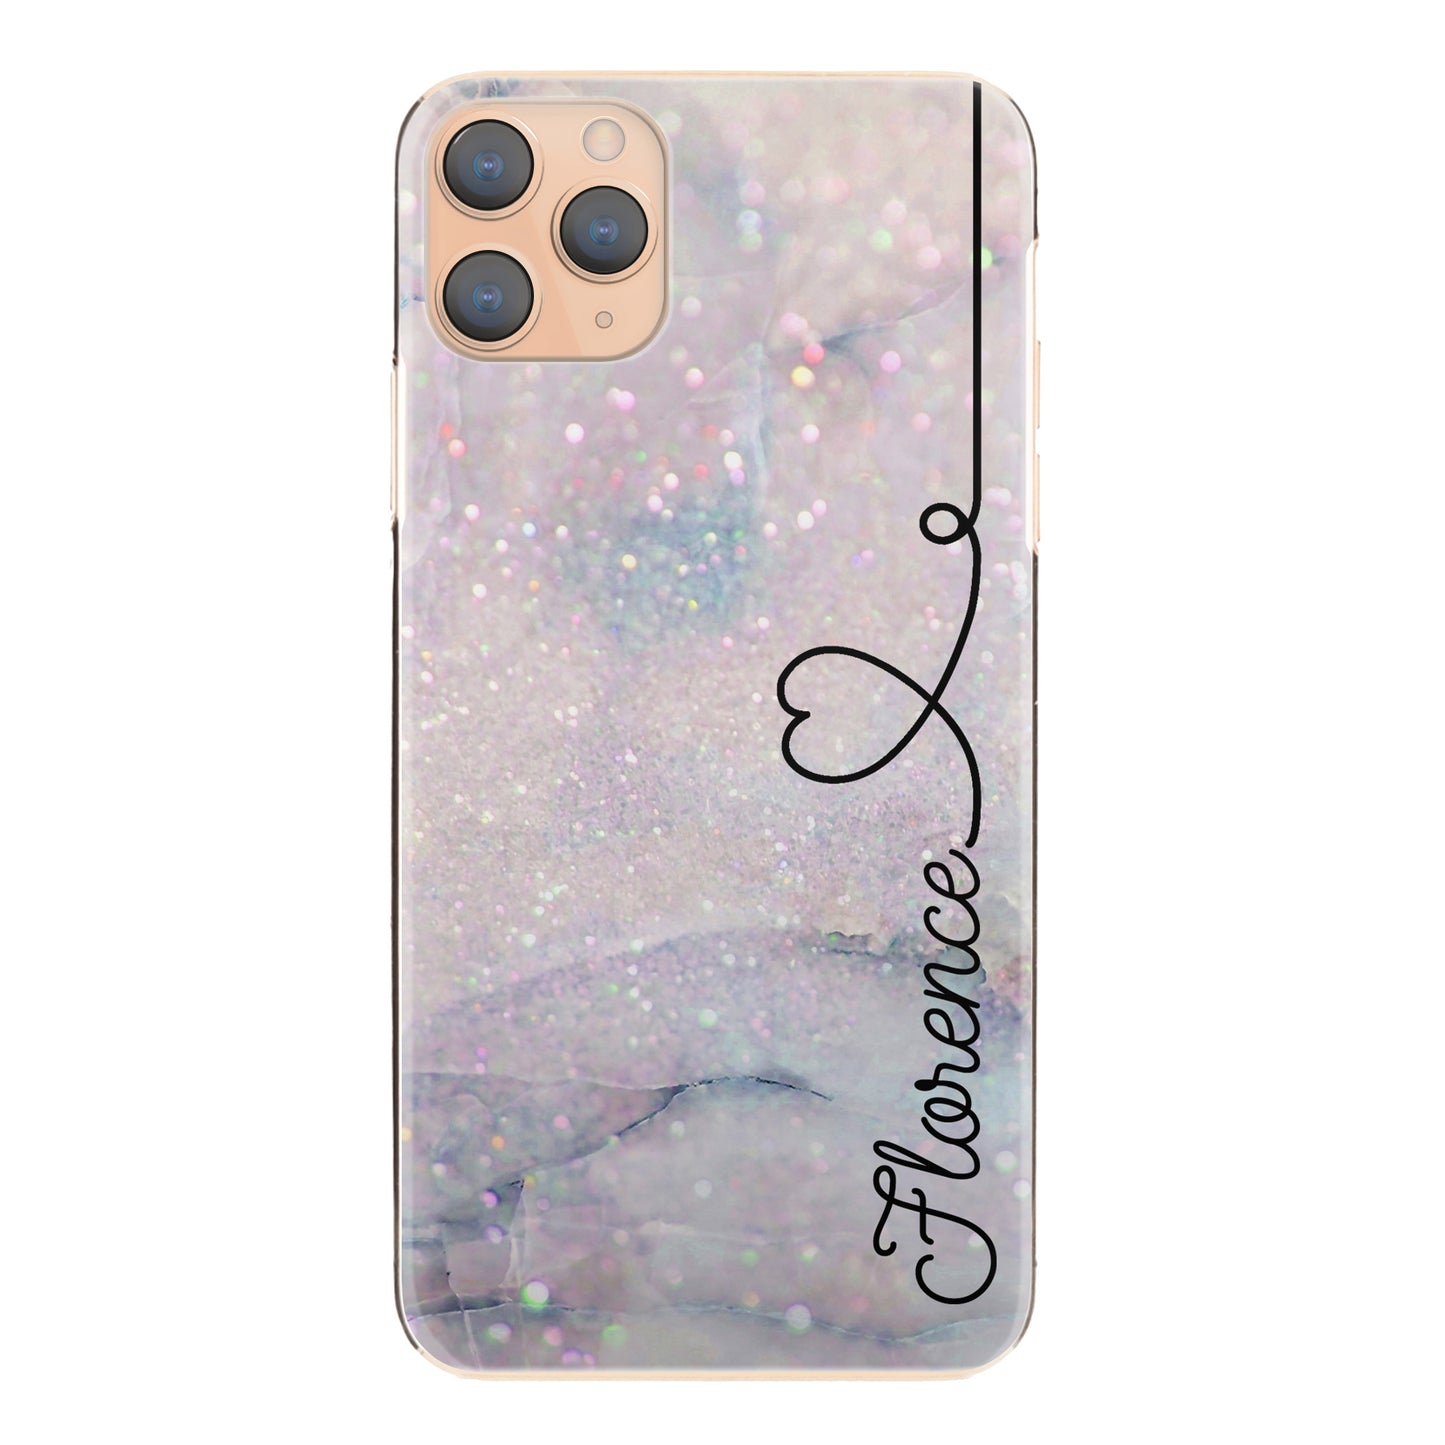 Personalised Sony Phone Hard Case with Stylish Text and Heart Line on Textured Glitter Effect